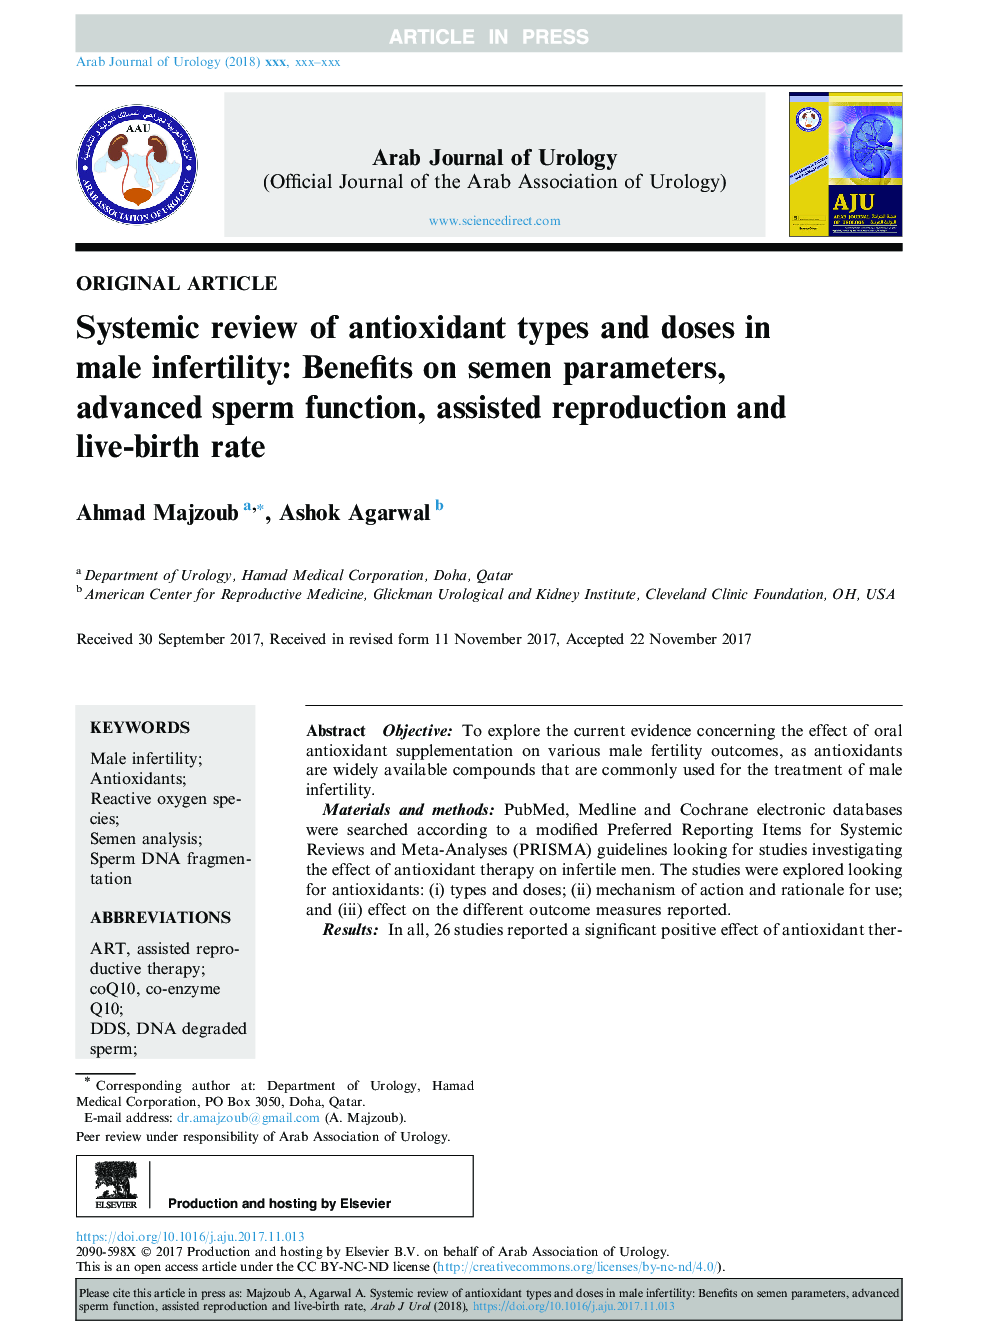 Systematic review of antioxidant types and doses in male infertility: Benefits on semen parameters, advanced sperm function, assisted reproduction and live-birth rate